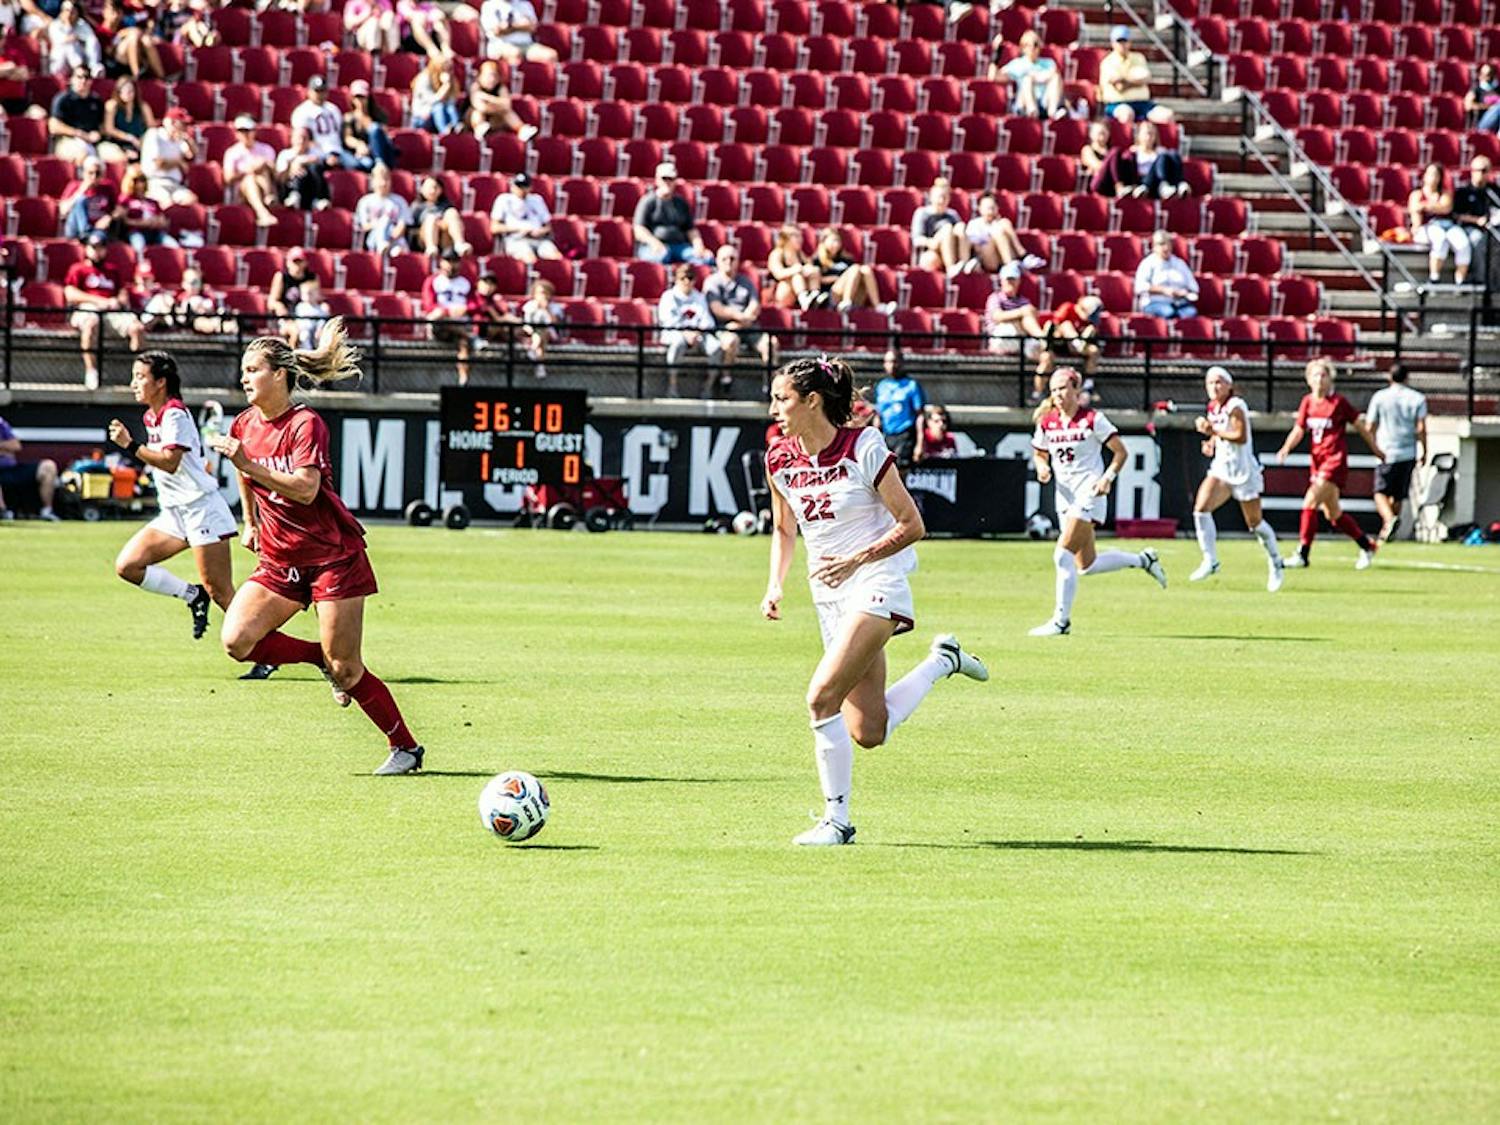 Graduate forward Ryan Gareis runs towards the goal during the South Carolina versus Alabama soccer game on Oct. 24, 2021. The Gamecocks lost 2-1 to the Auburn Tigers in the quarterfinals of the SEC Tournament.&nbsp;